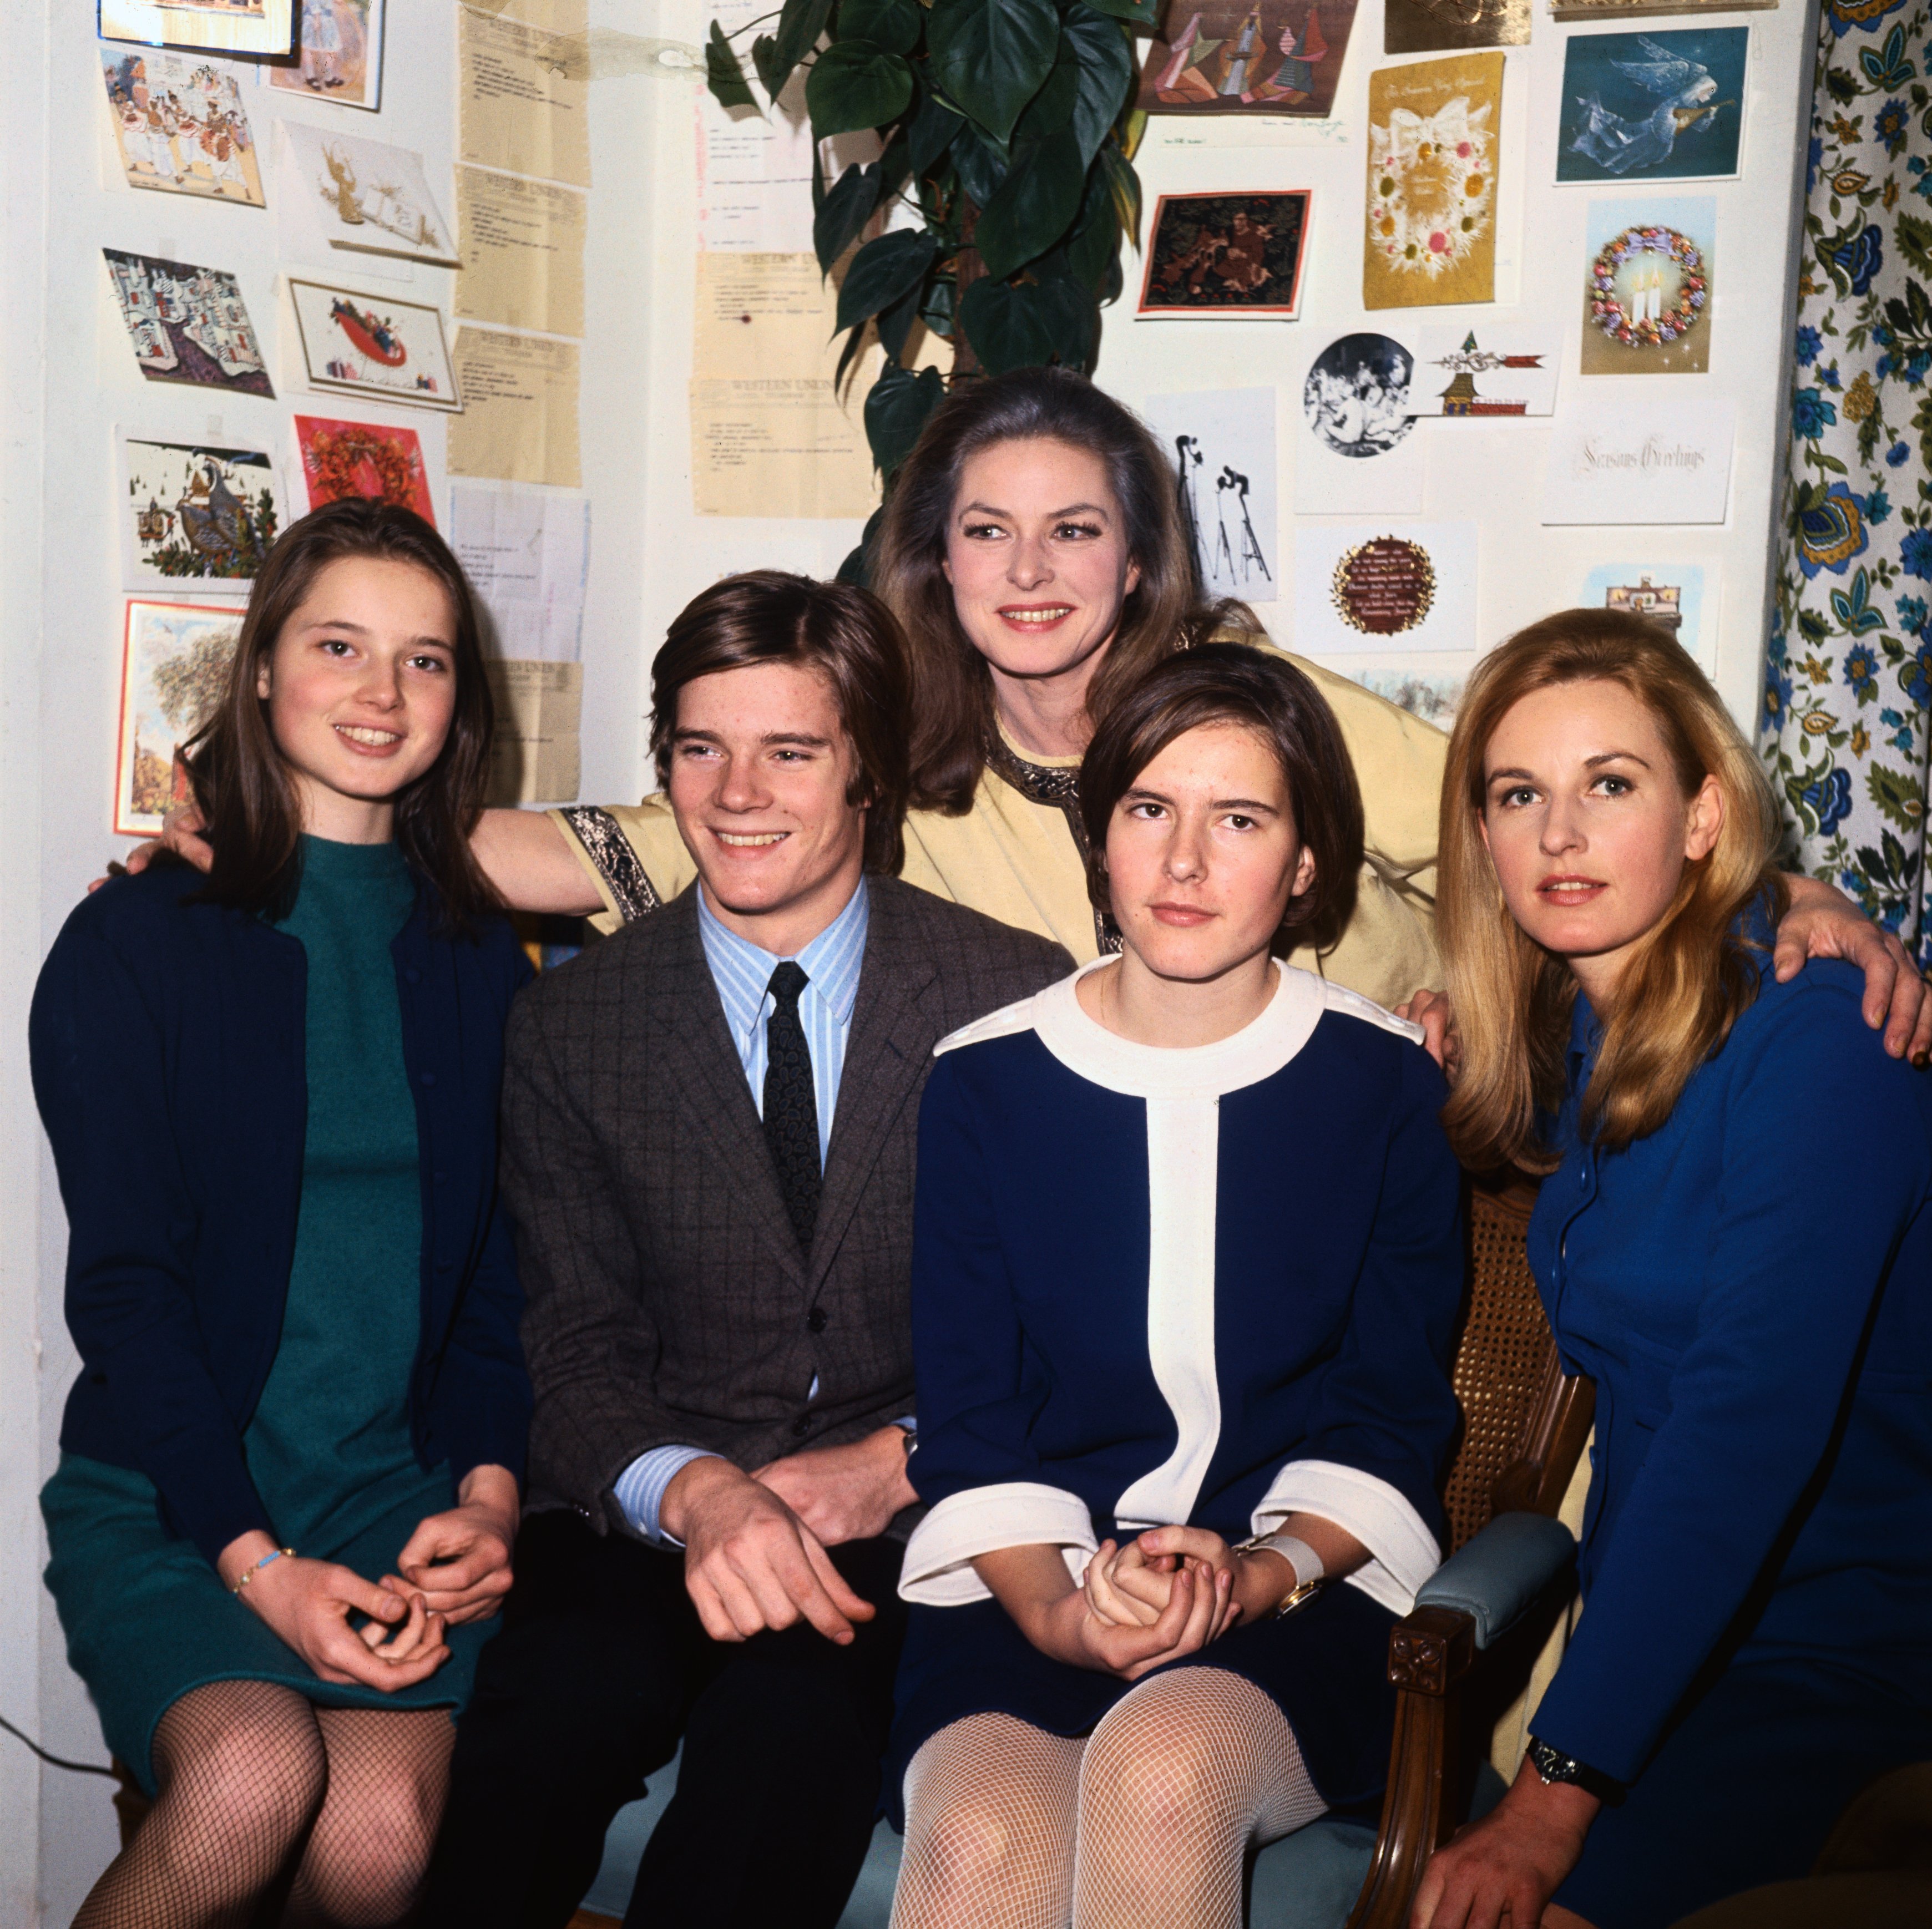 Photo of Ingrid Bergman, Isabella Rossellini, Roberto, Jr. Rossellini, Isotta Rossellini, and Pia Lindström on December 27, 1967, in New York | Source: Getty Images